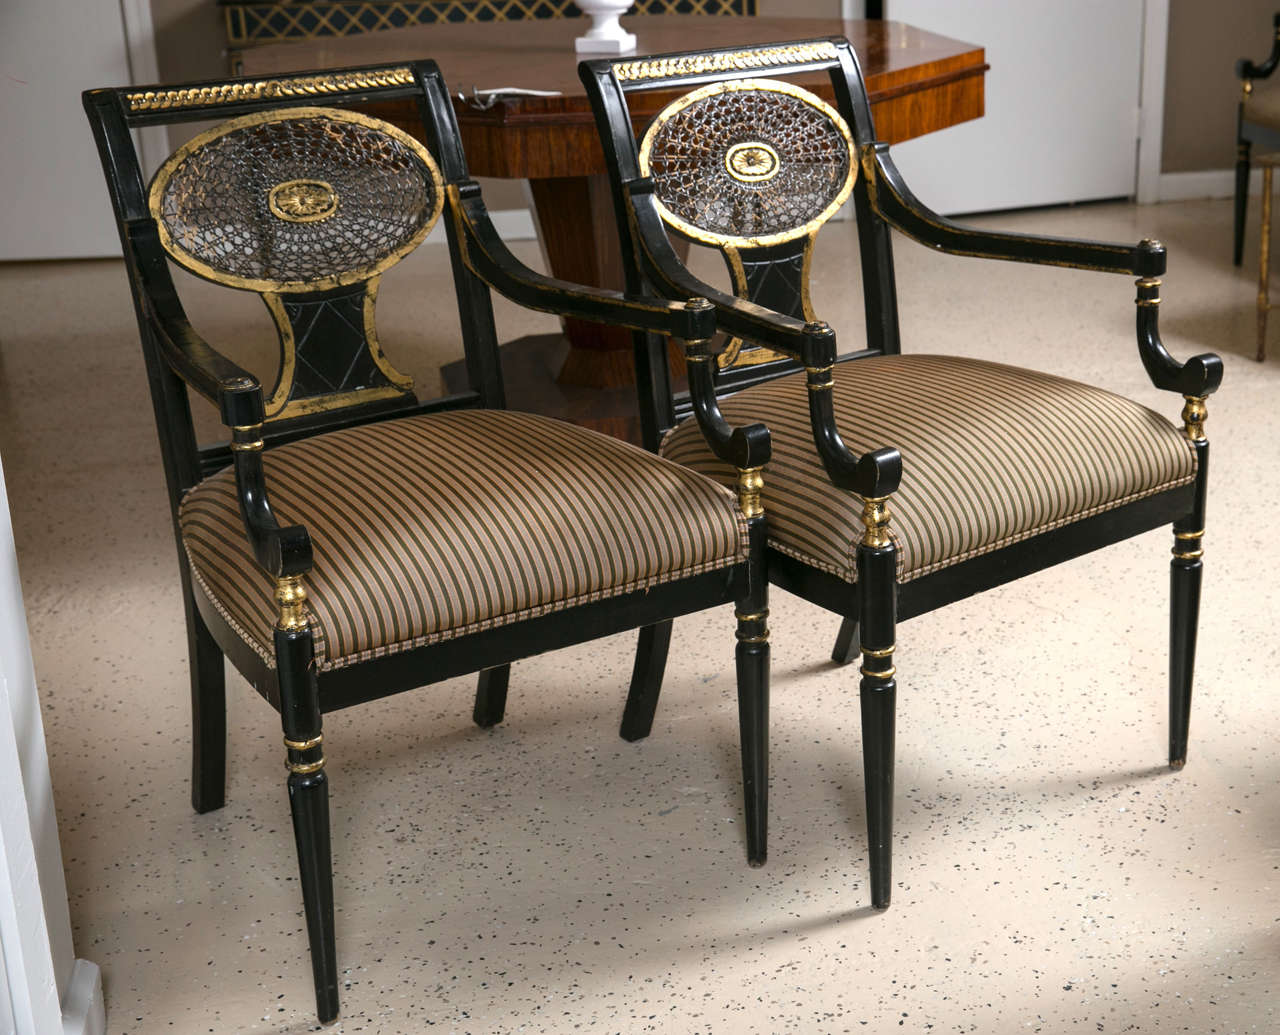 Set of four ebonized gilt decorated armchairs. Can buy as little as one or as many as all four of these finely ebonized armchairs. Each tapering circular leg supporting a hi stuffed seat leading to sable armrests with spider backrests. All with a